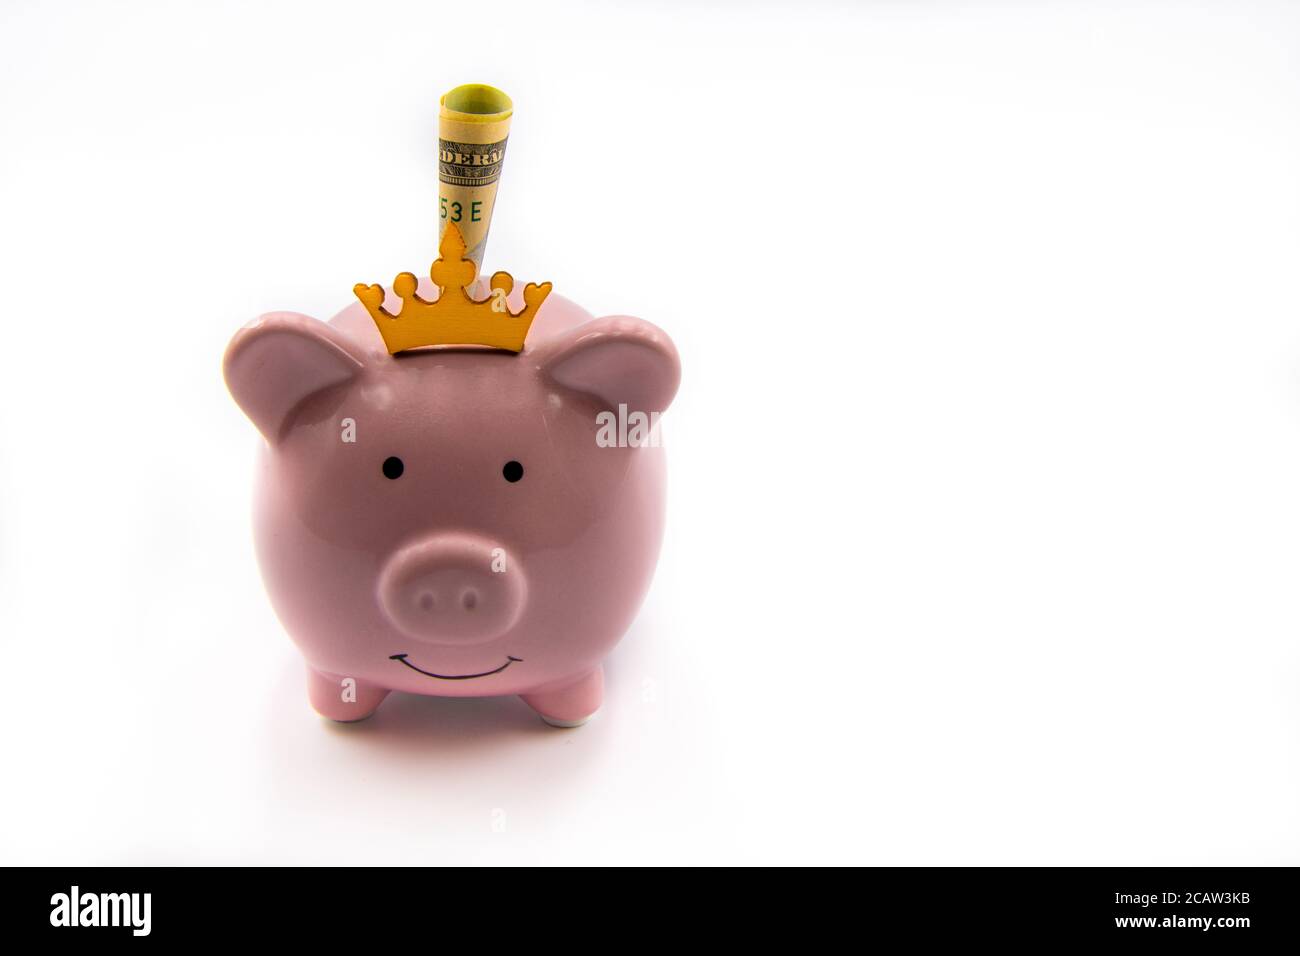 Pink piggy bank with golden crown and USD banknote isolated over white background with copy space, cash is king concept image Stock Photo